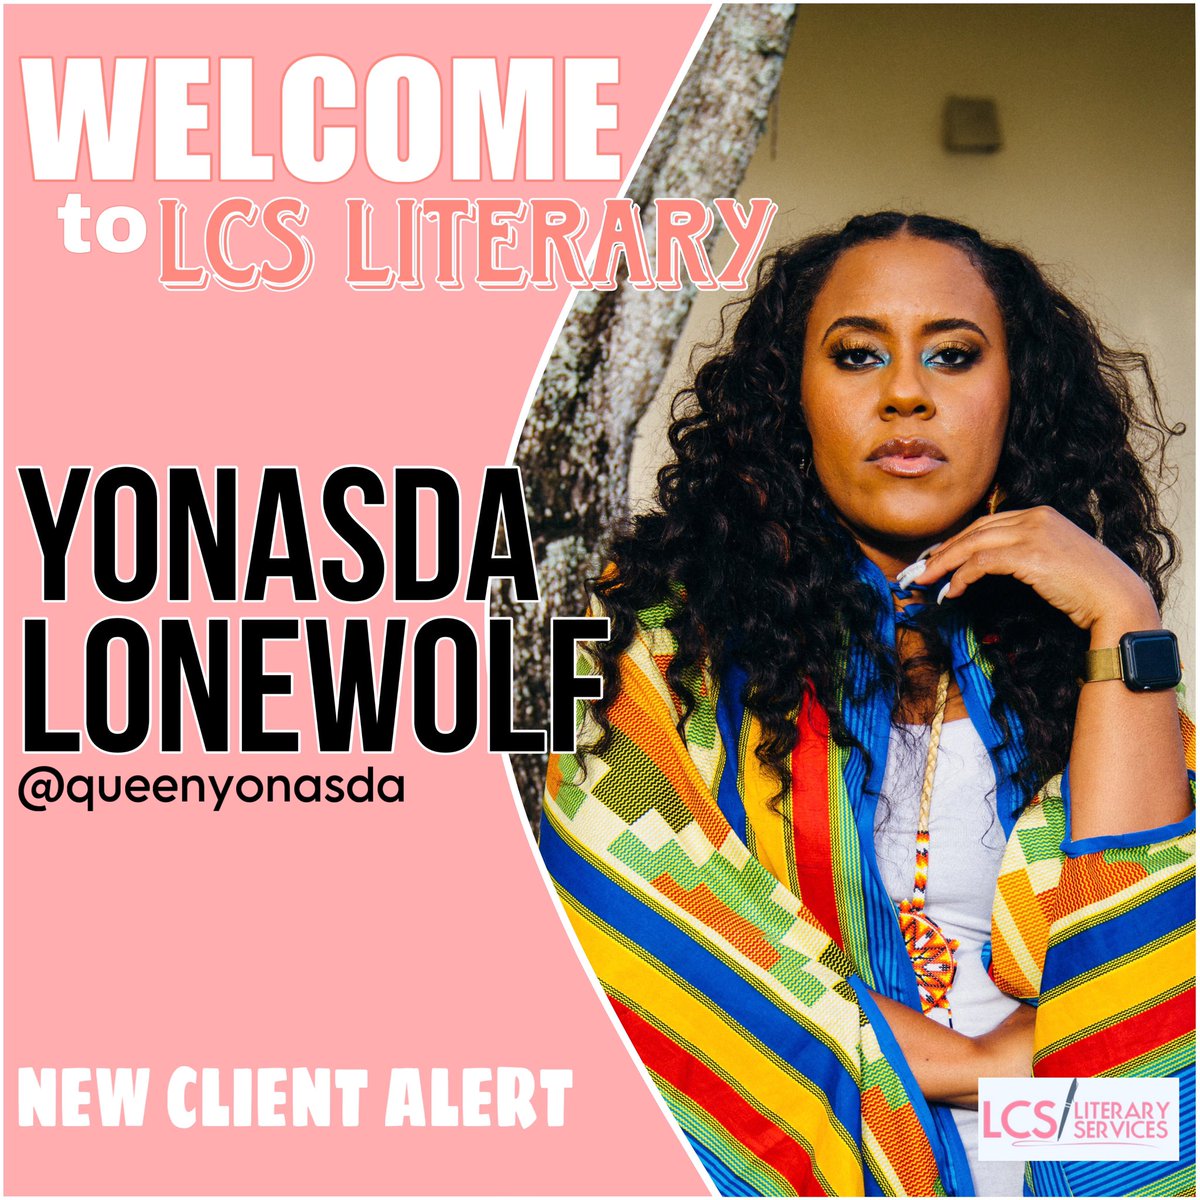 📣 LCS LIT NEWS: WELCOME YoNasDa Lonewolf to the LCS Literary Agency! We are so thrilled to have you join us. 📖 Rep Kimberly L. Jones #authornews #booknews #author #Congratulations